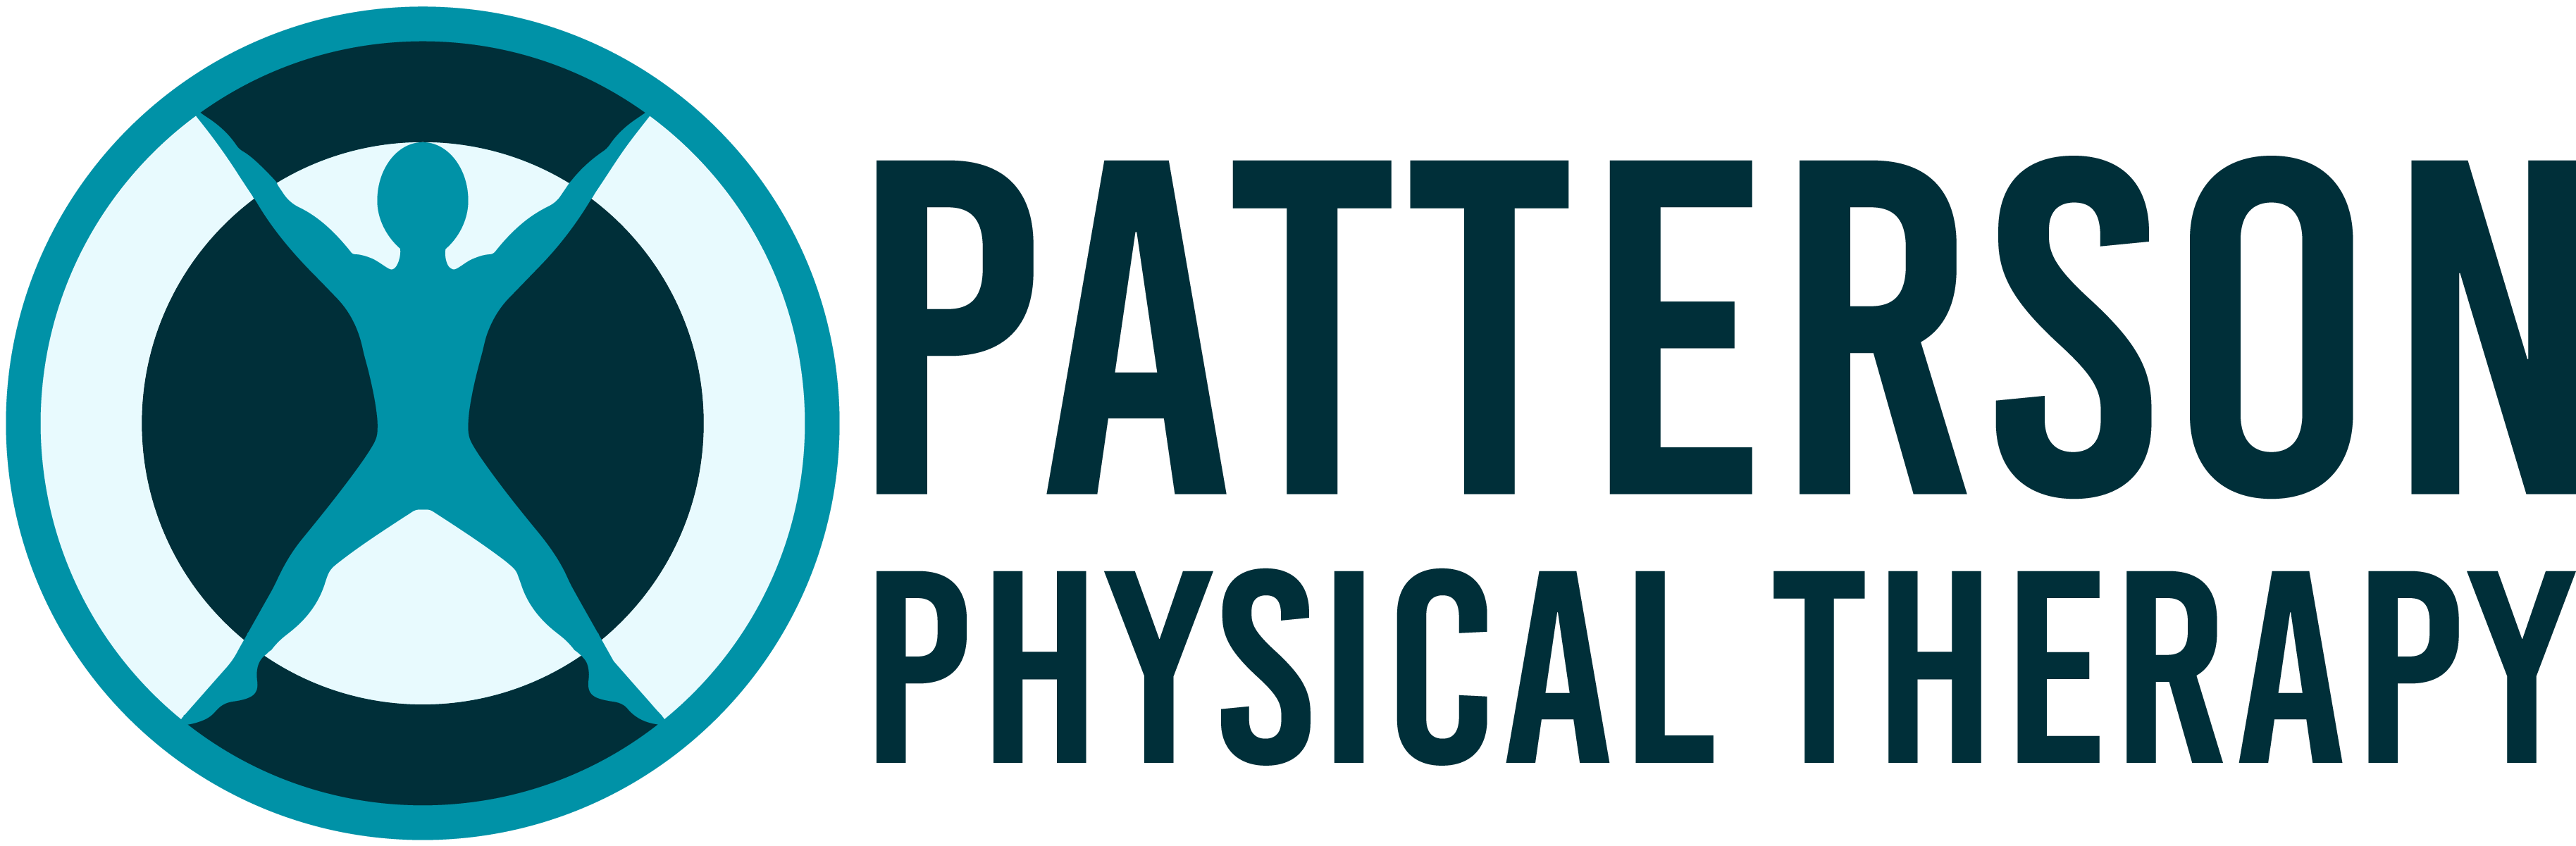 Patterson Physical Therapy logo, links to front page